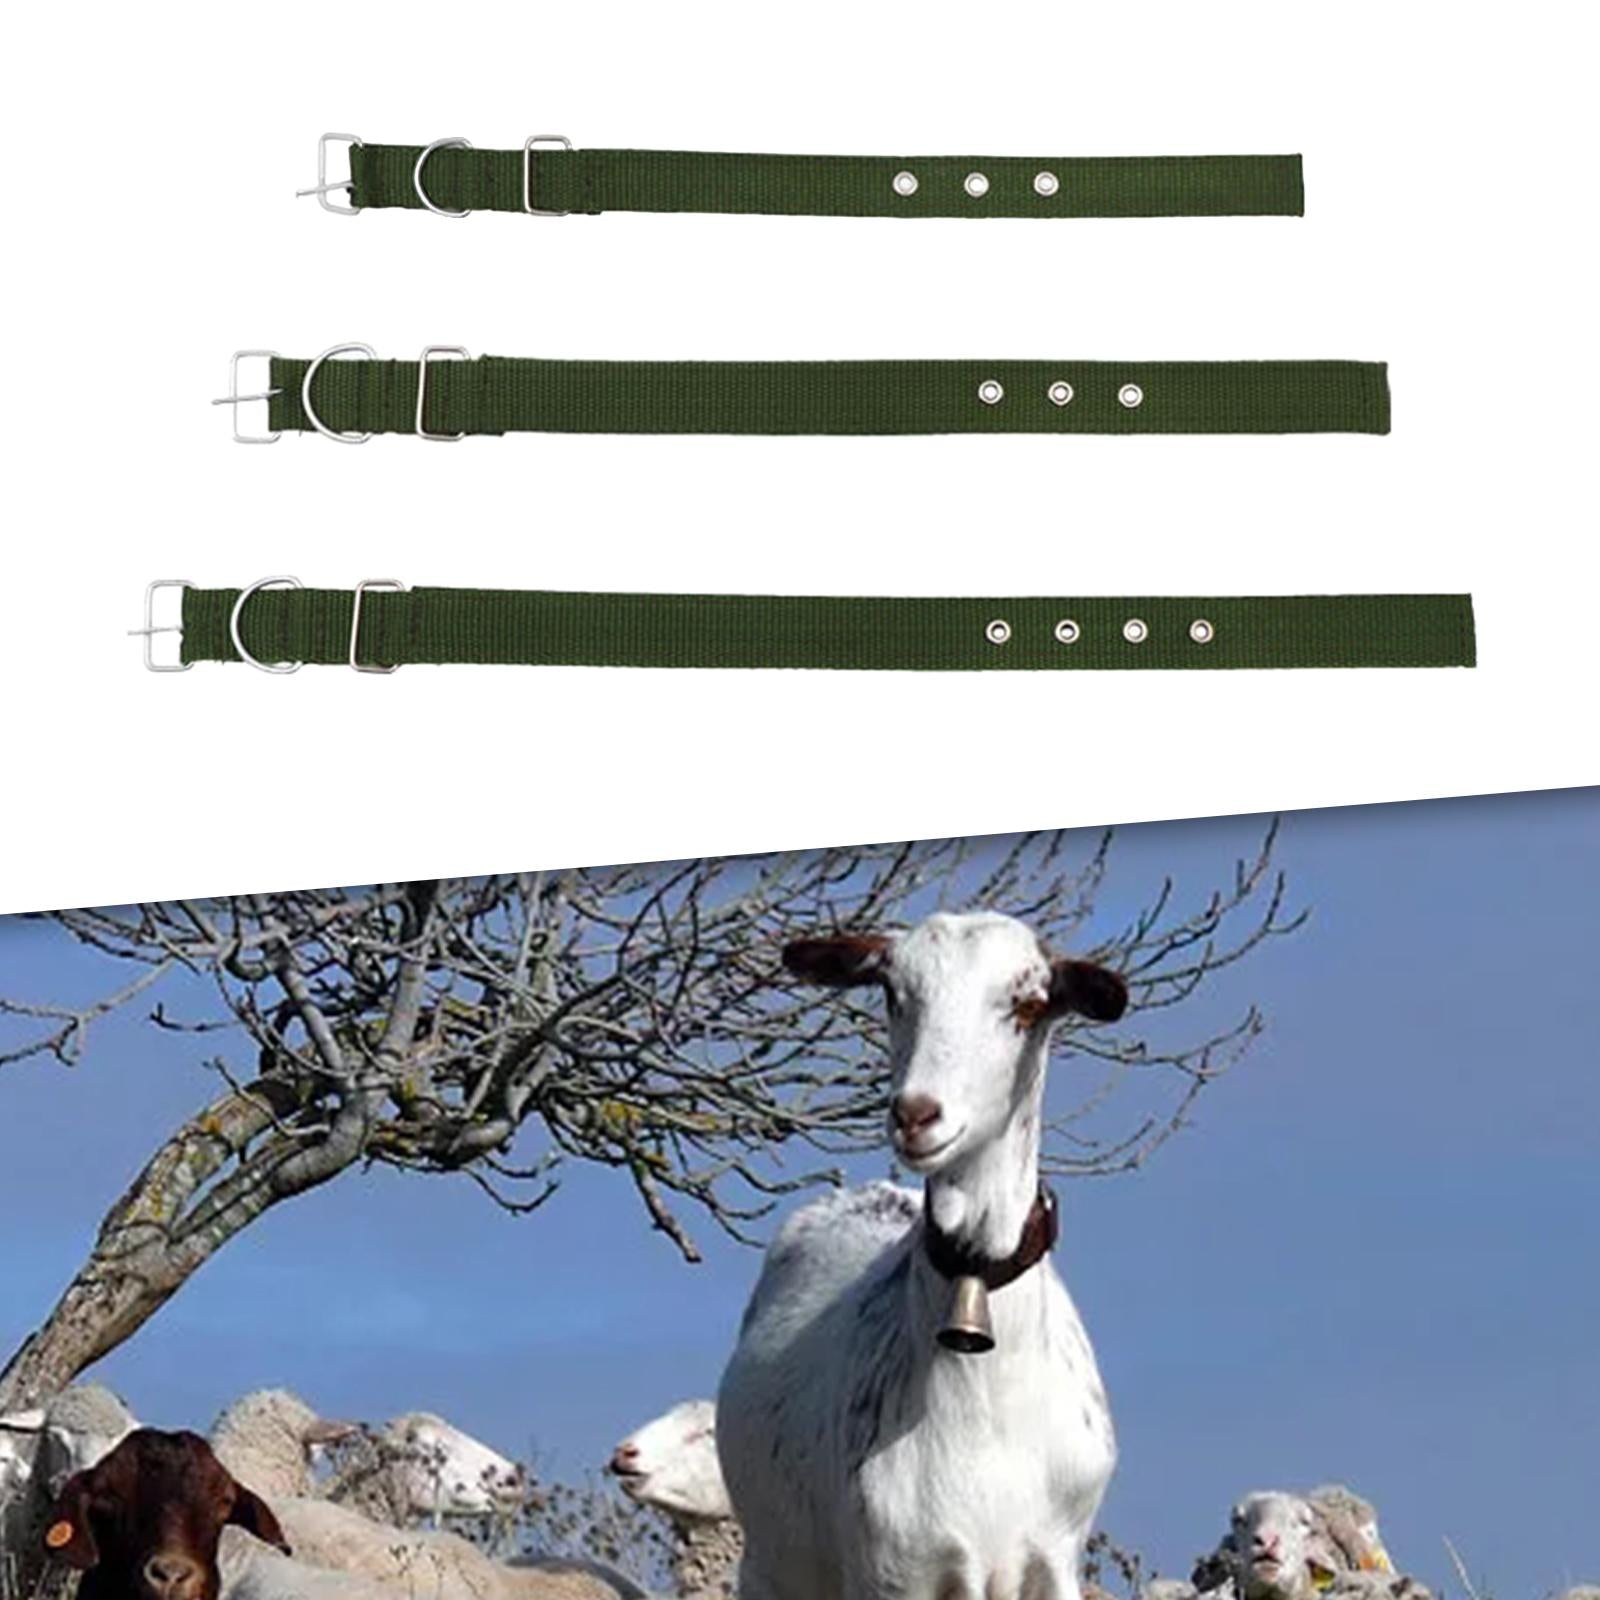 Portable Cow Neck Strap Thicken Sturdy Canvas for Farm Animal Sheep Horse 14.56in